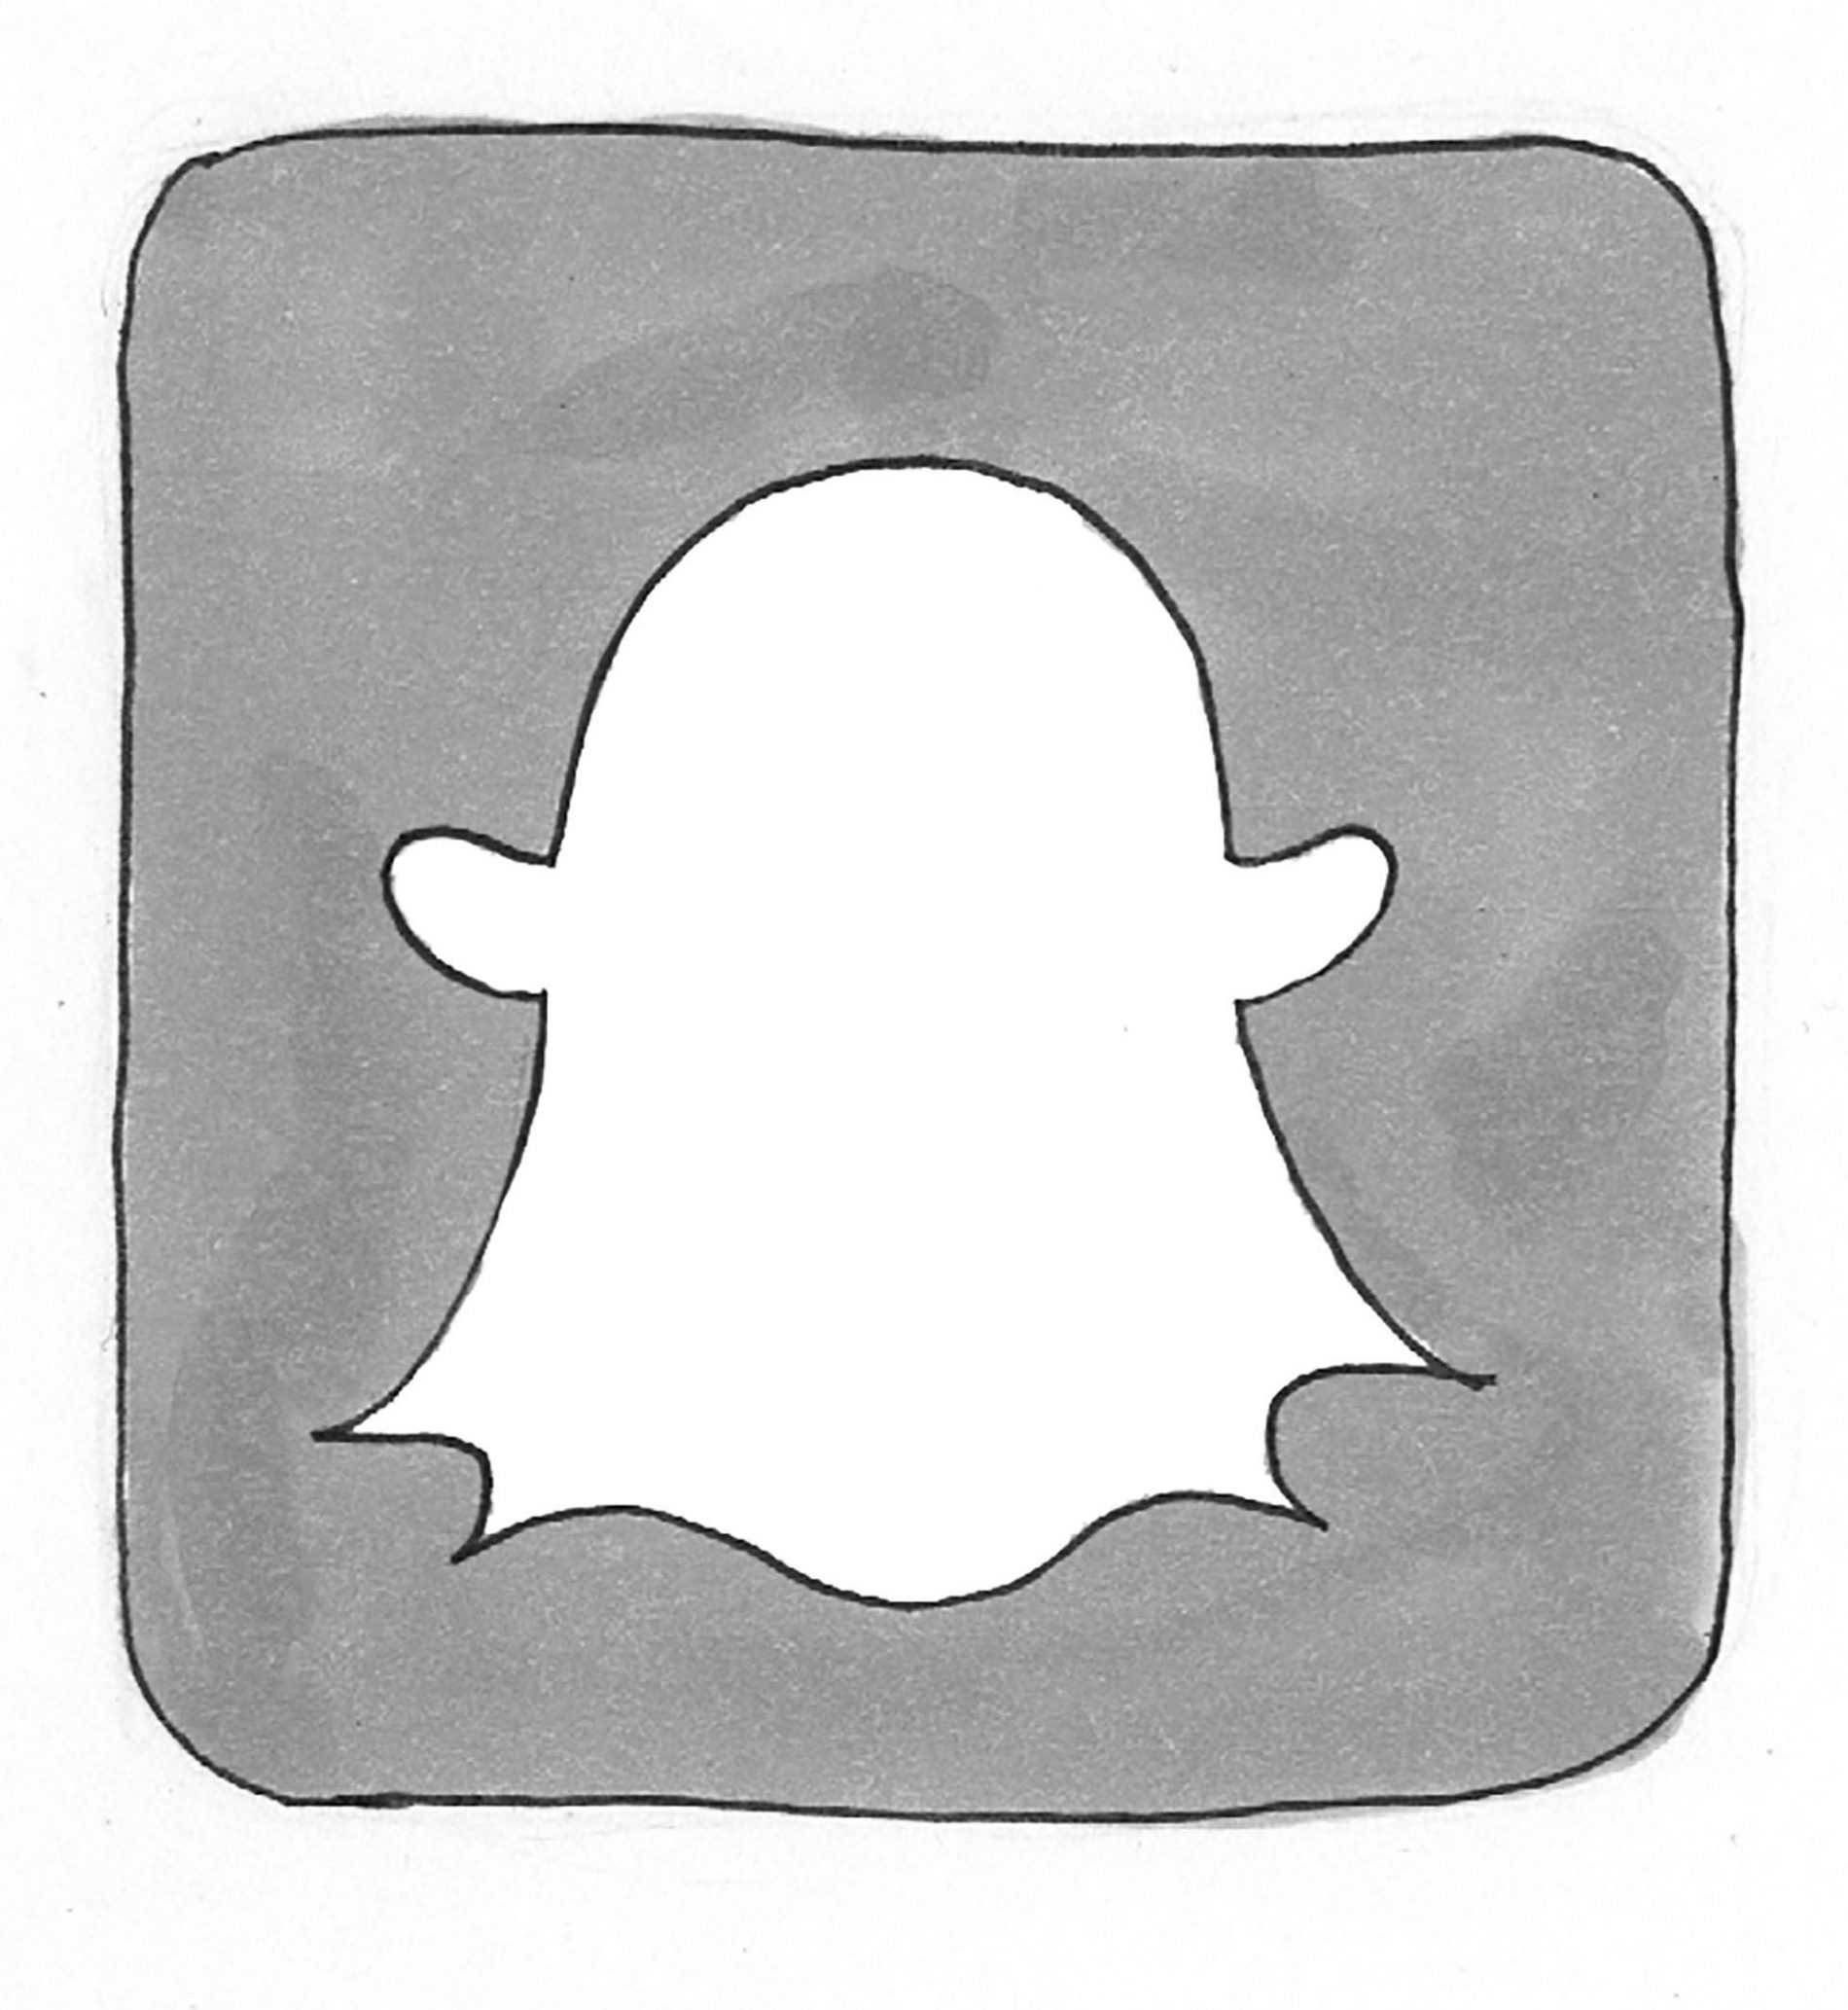 The Snapchat update disappoints (mostly) » Panther Prowler the